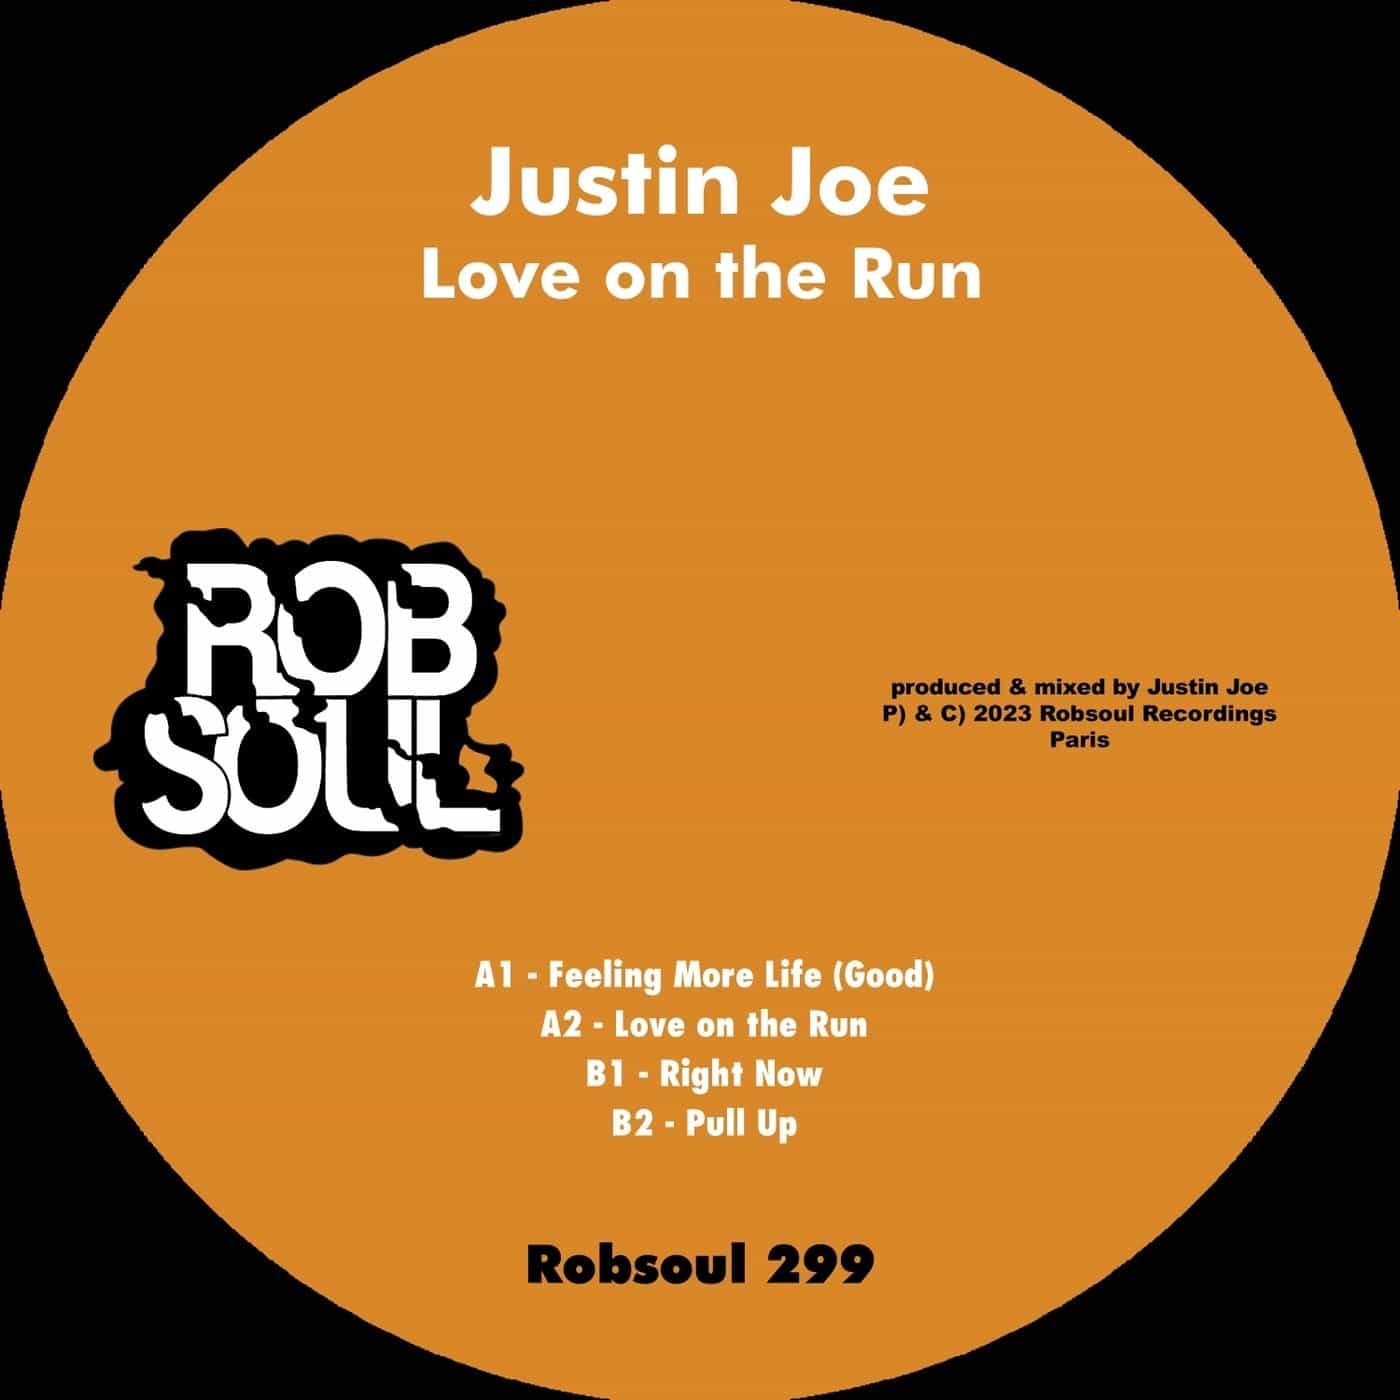 image cover: Justin Joe - Love on the Run / RB299